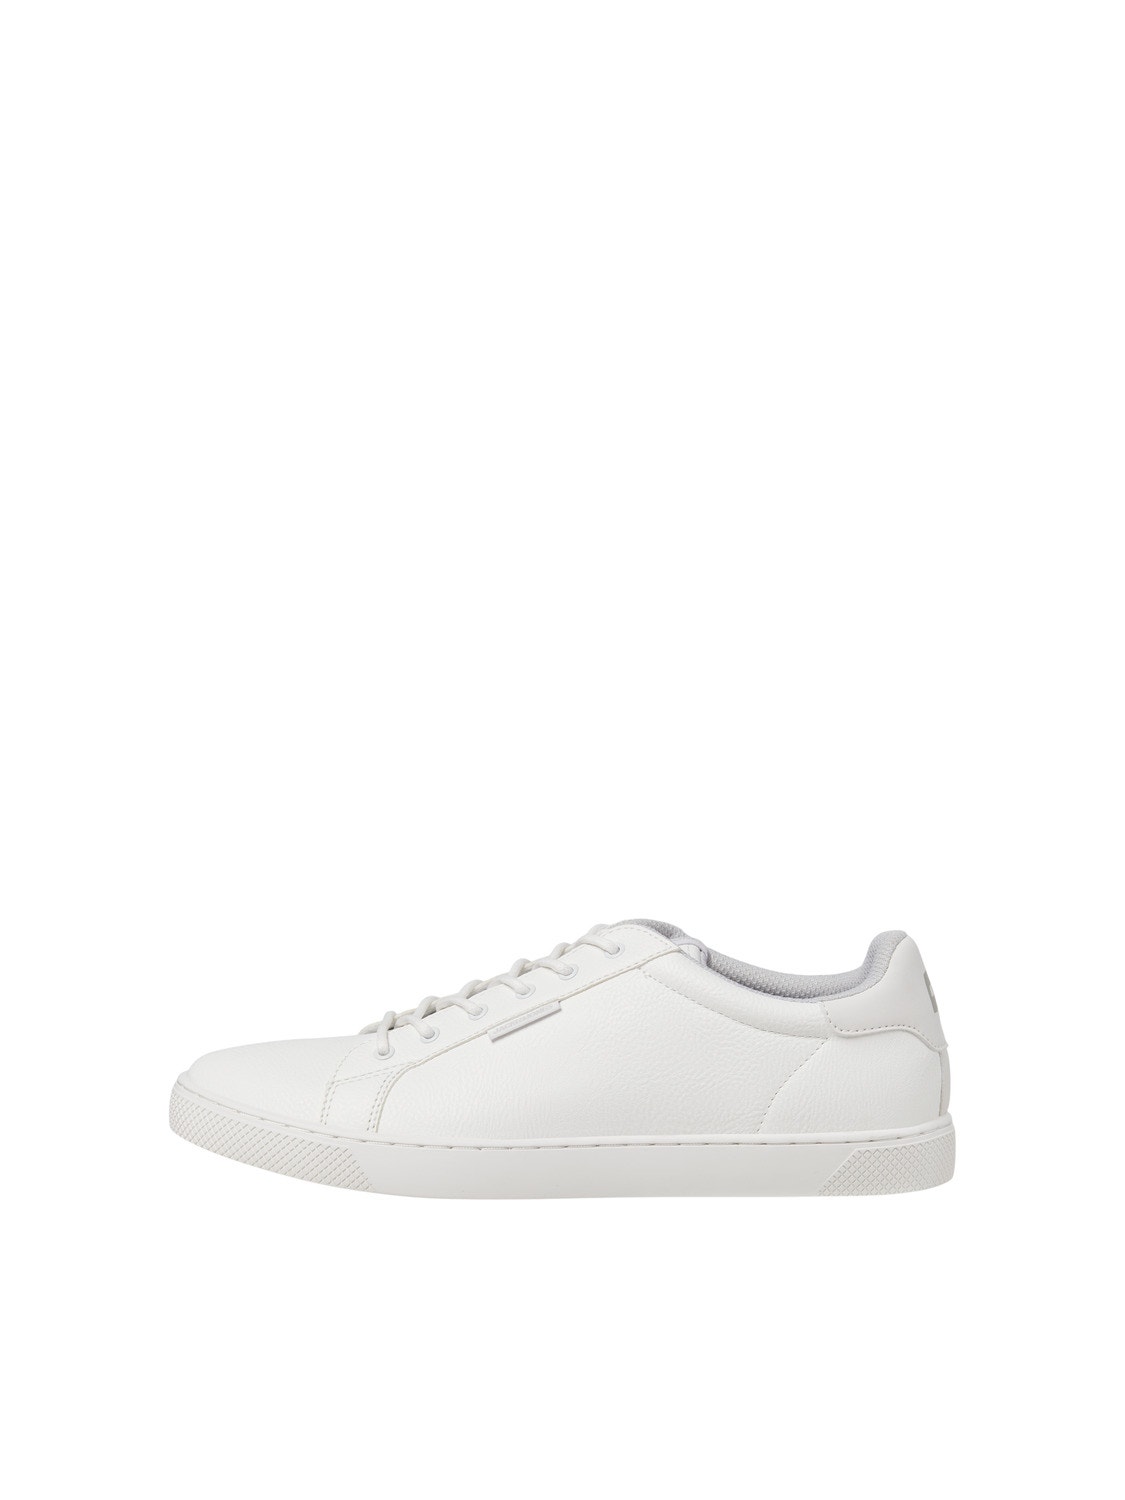 Jack & Jones Polyester Trainers -Bright White - 12150725